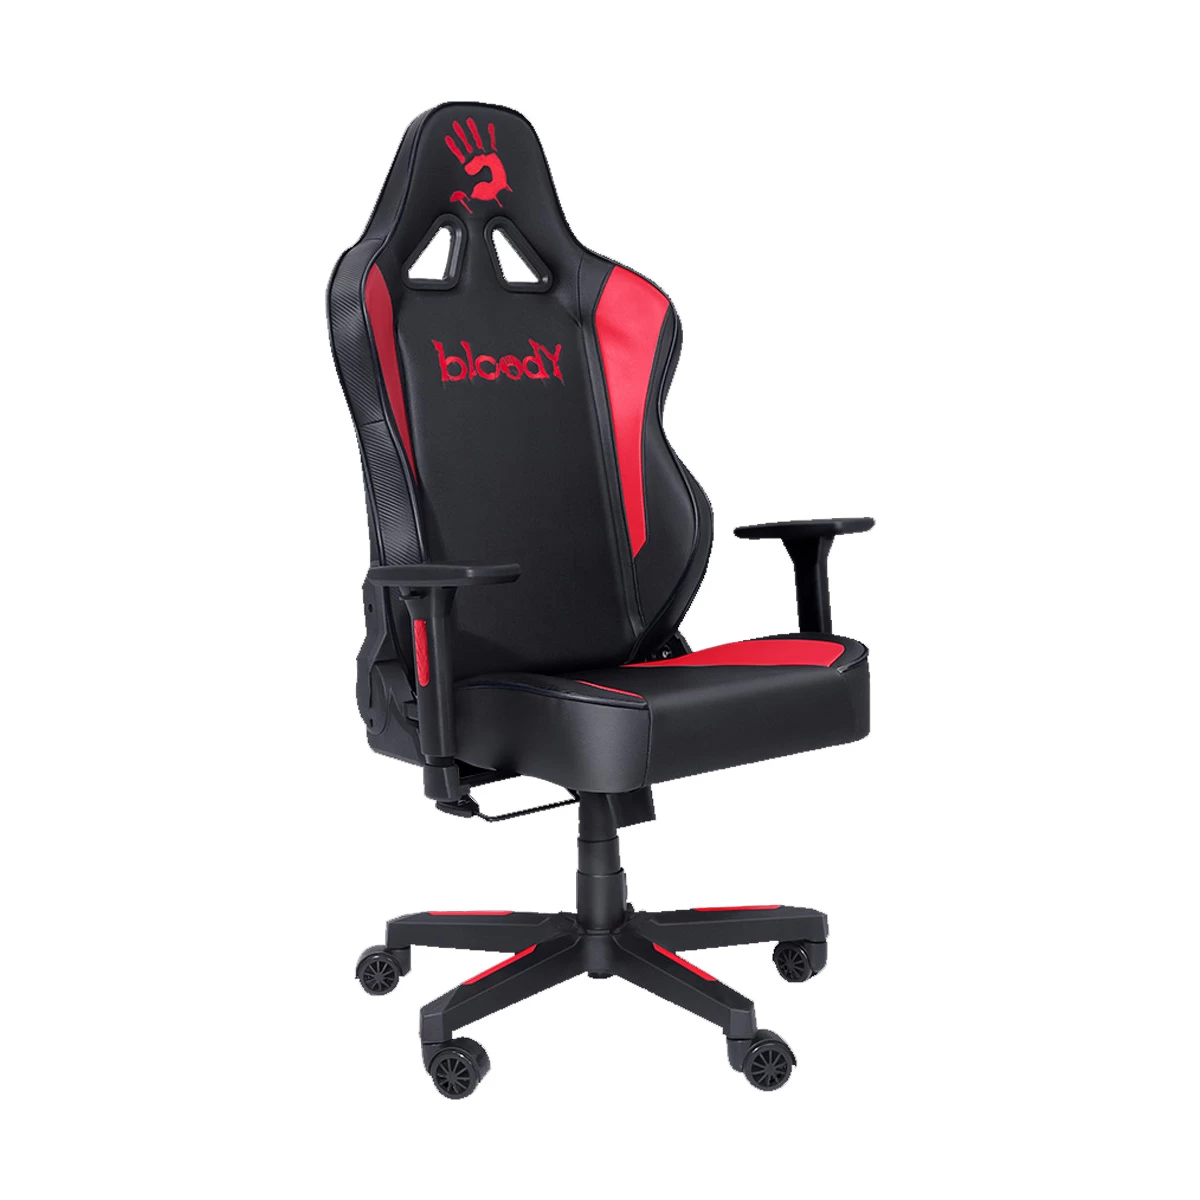 Pro Series Gt099 Gaming Gear Racing Chair Gaming Chair